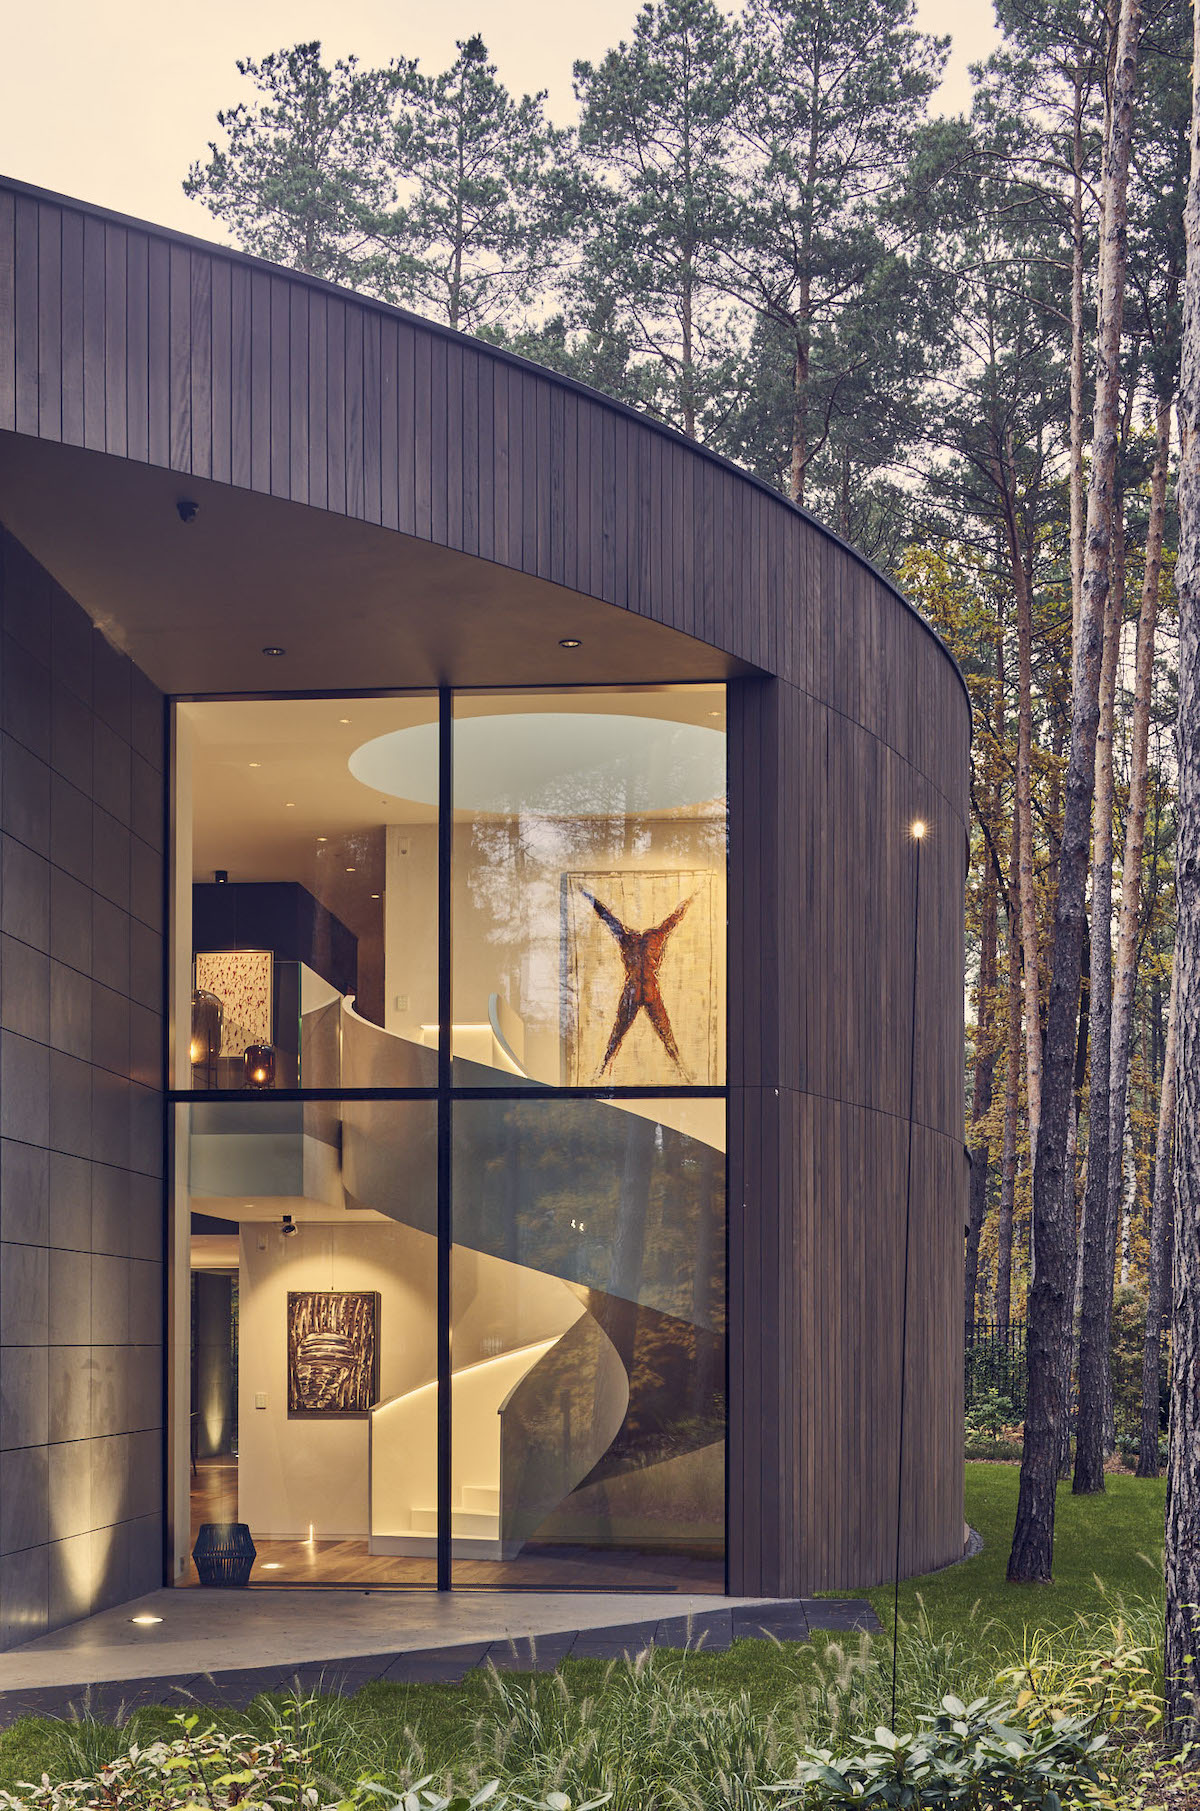 Circular Home in the Woods